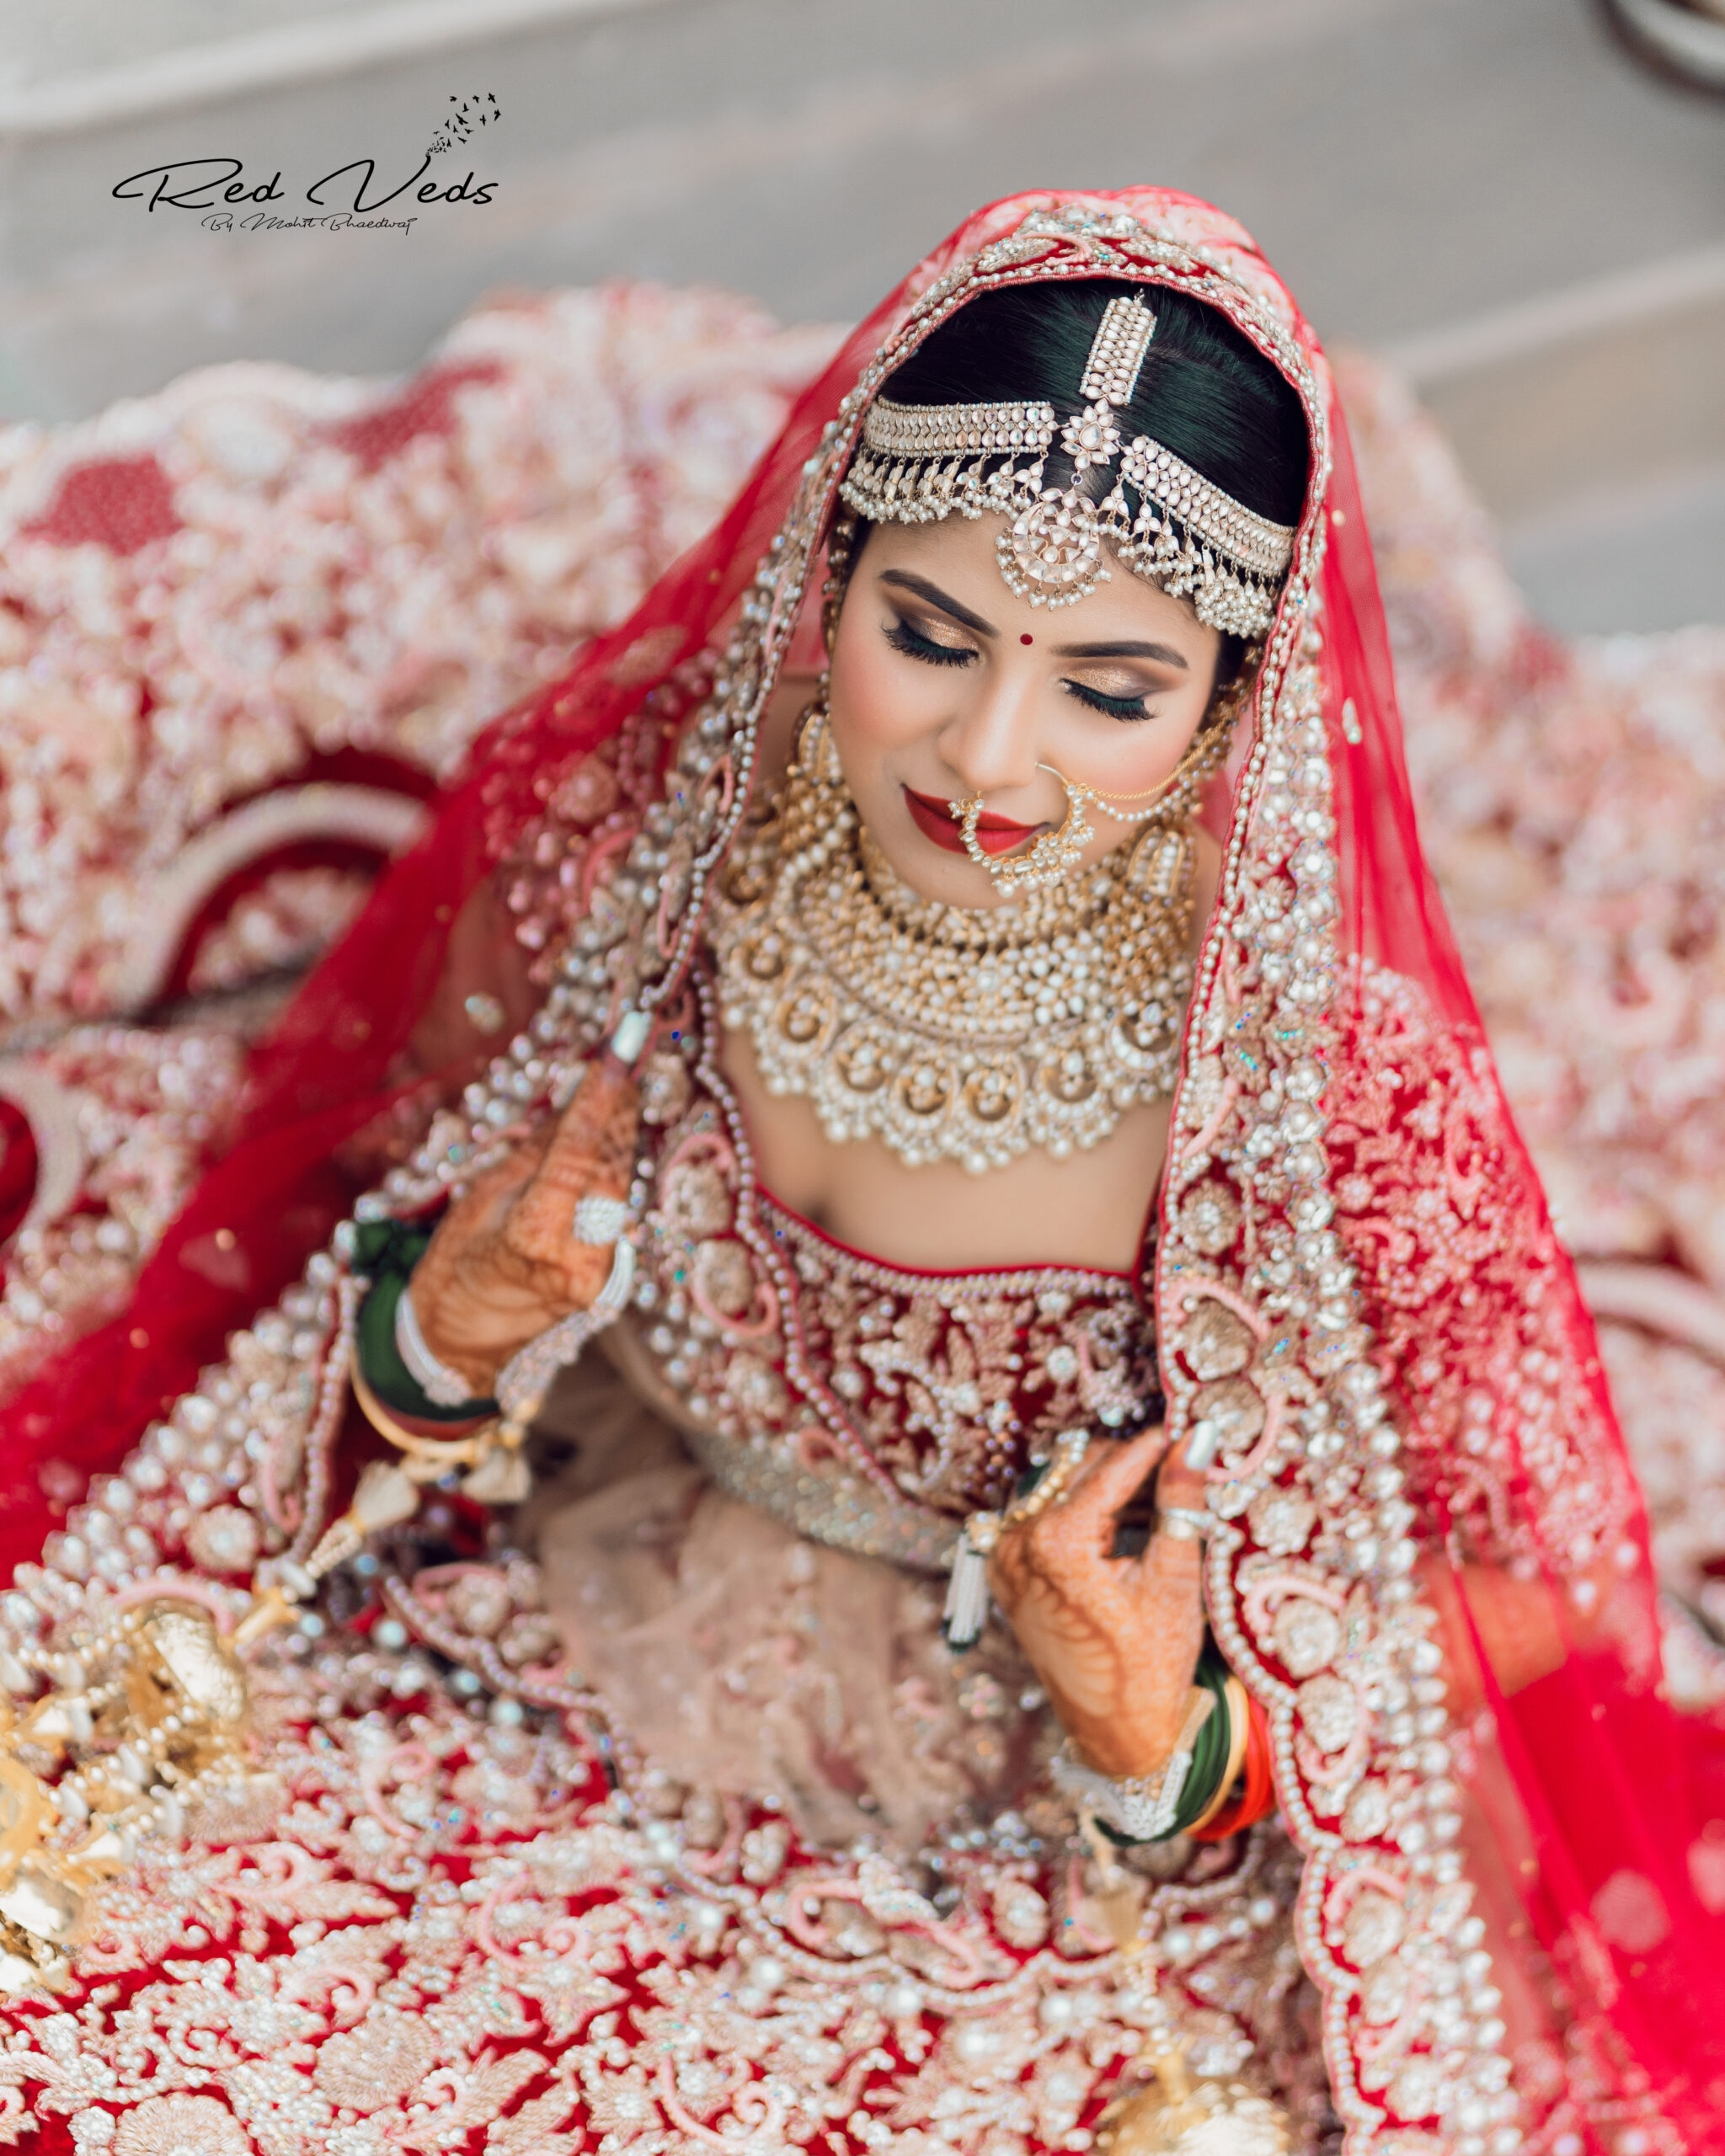 Playing with Jewellery | Indian bride photography poses, Indian bride poses,  Bride photography poses